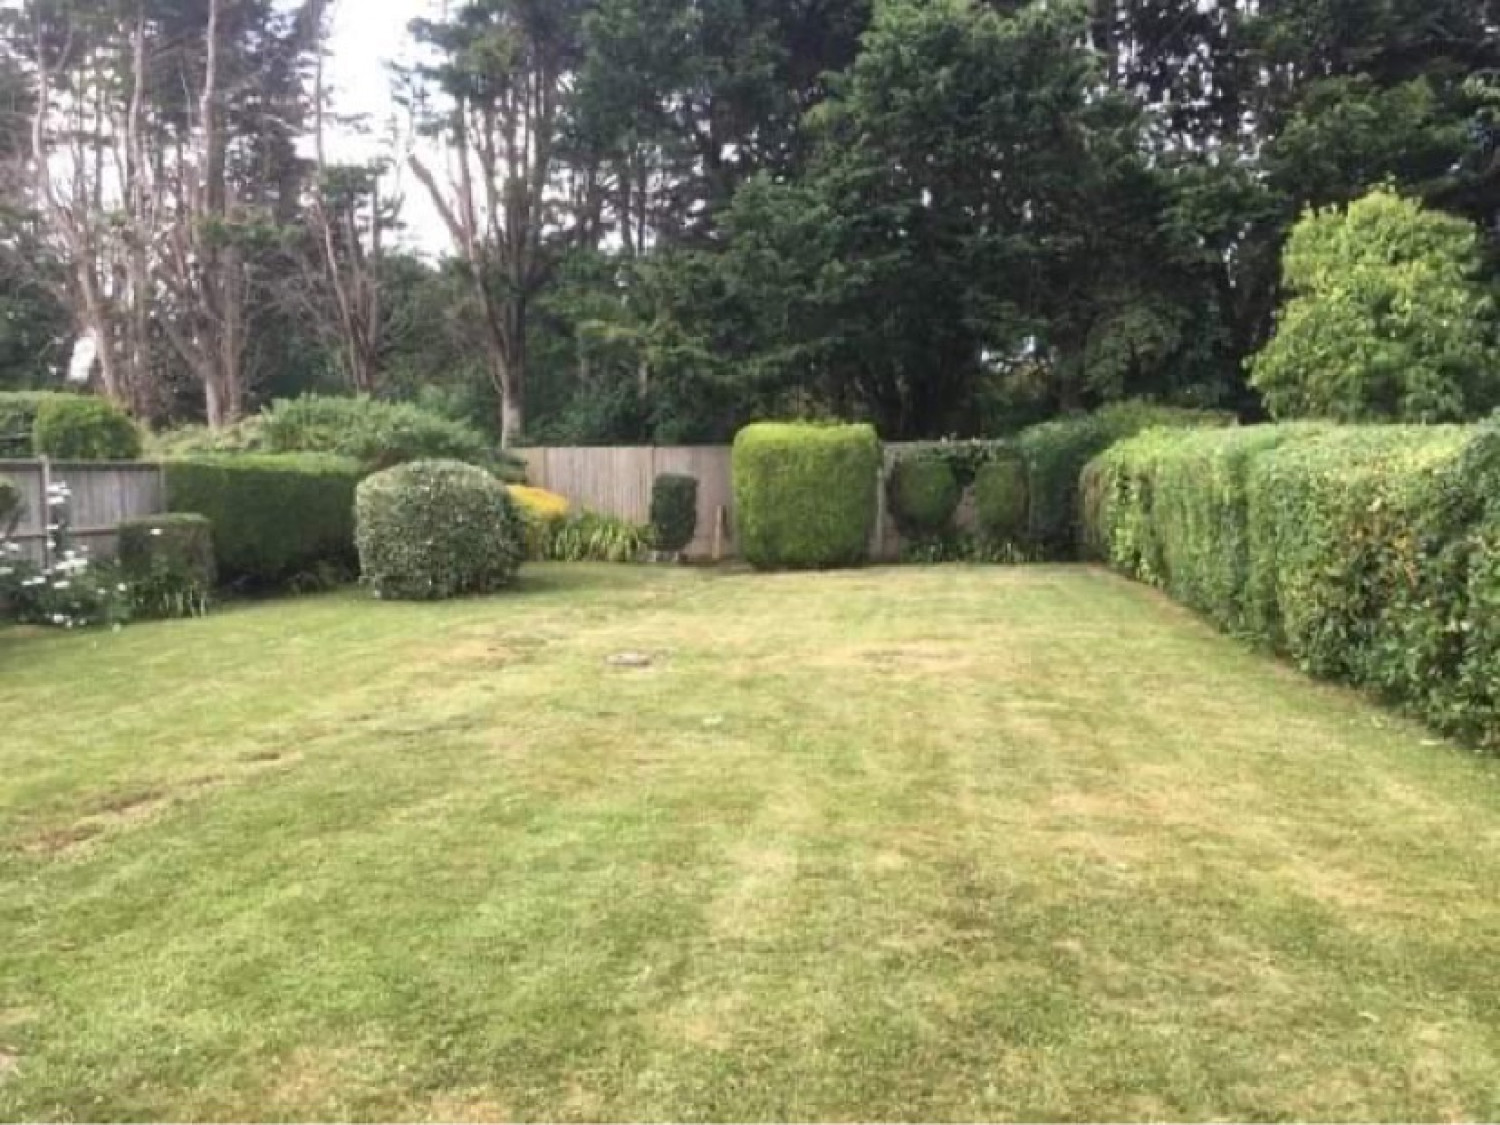 Hedges after trimming  - Before & After Photos -  LONG'S LAWNS